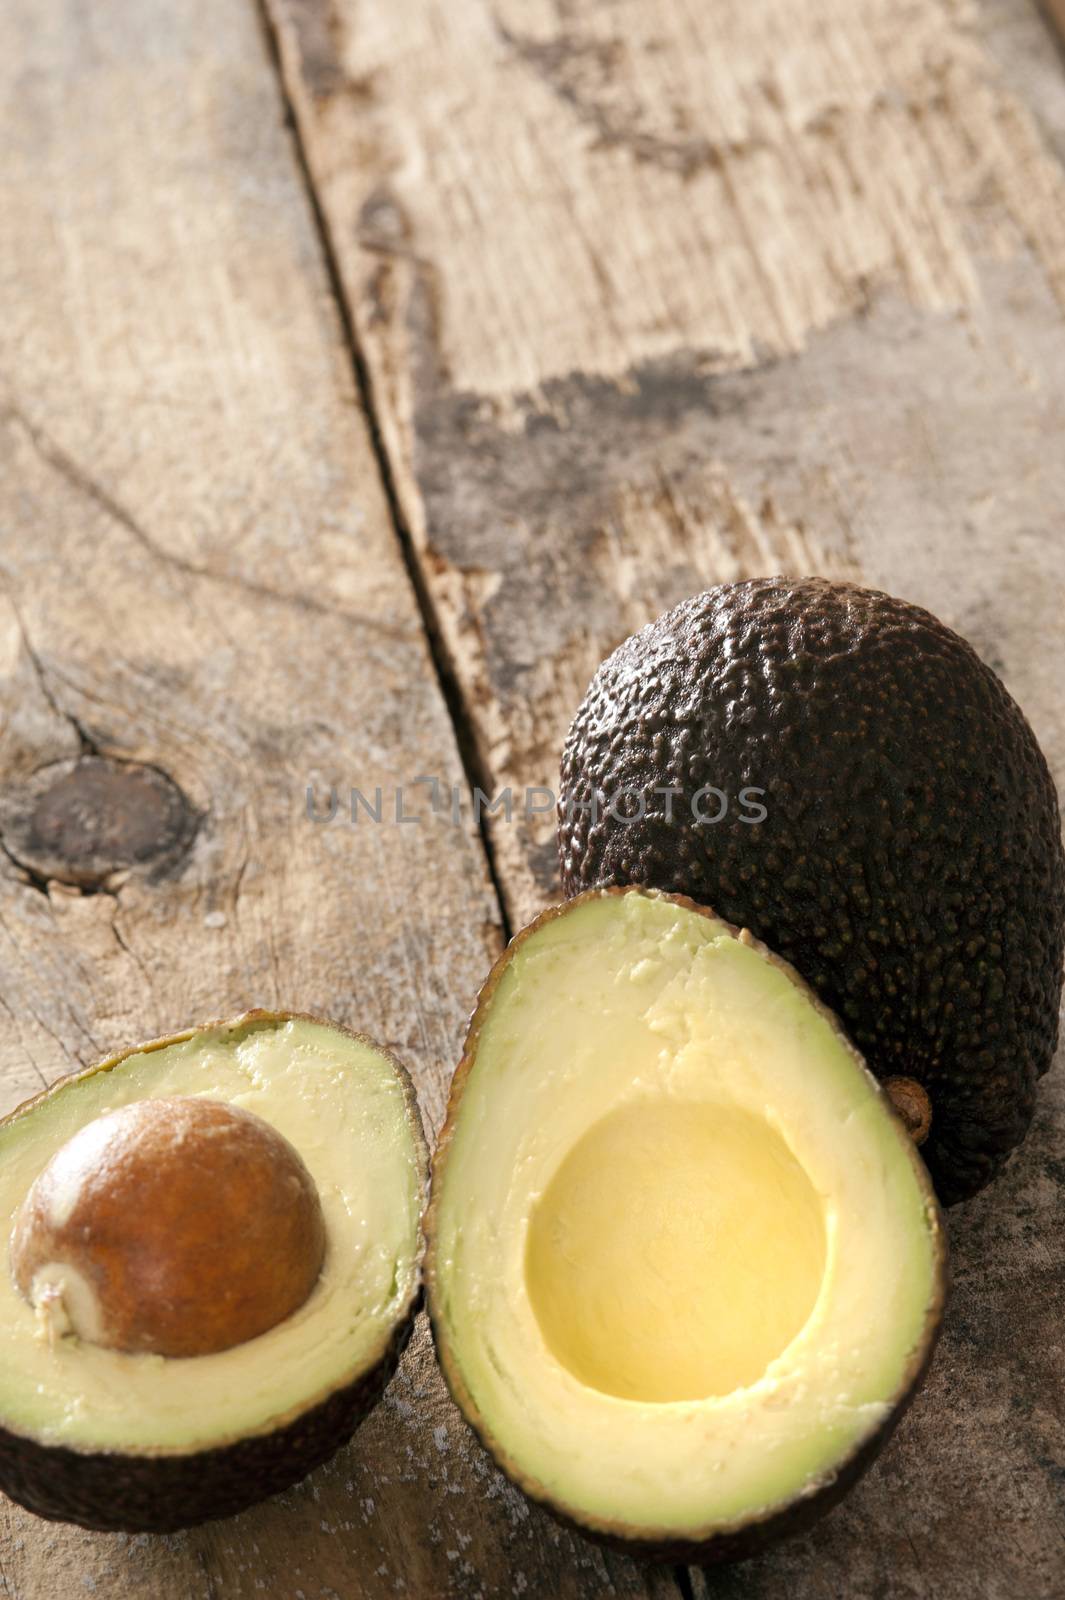 Ripe halved and whole avocado pear on a rustic wooden table ready to be served as a salad ingredient, high angle view with copy space